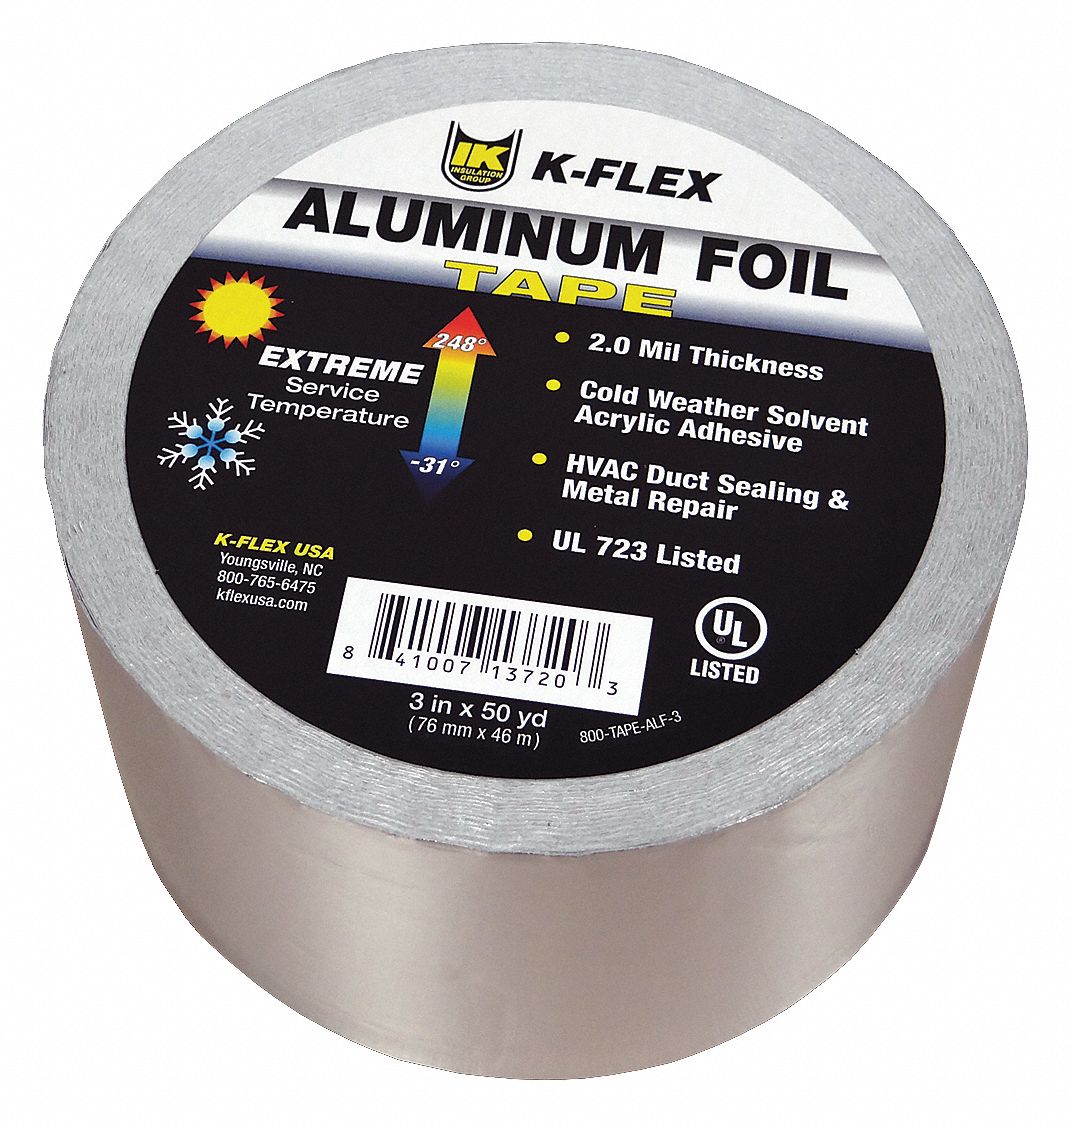 Malleable Foil Free Shipping 4 Rolls Aluminum Foil Tape 2" x 150' With Liner 